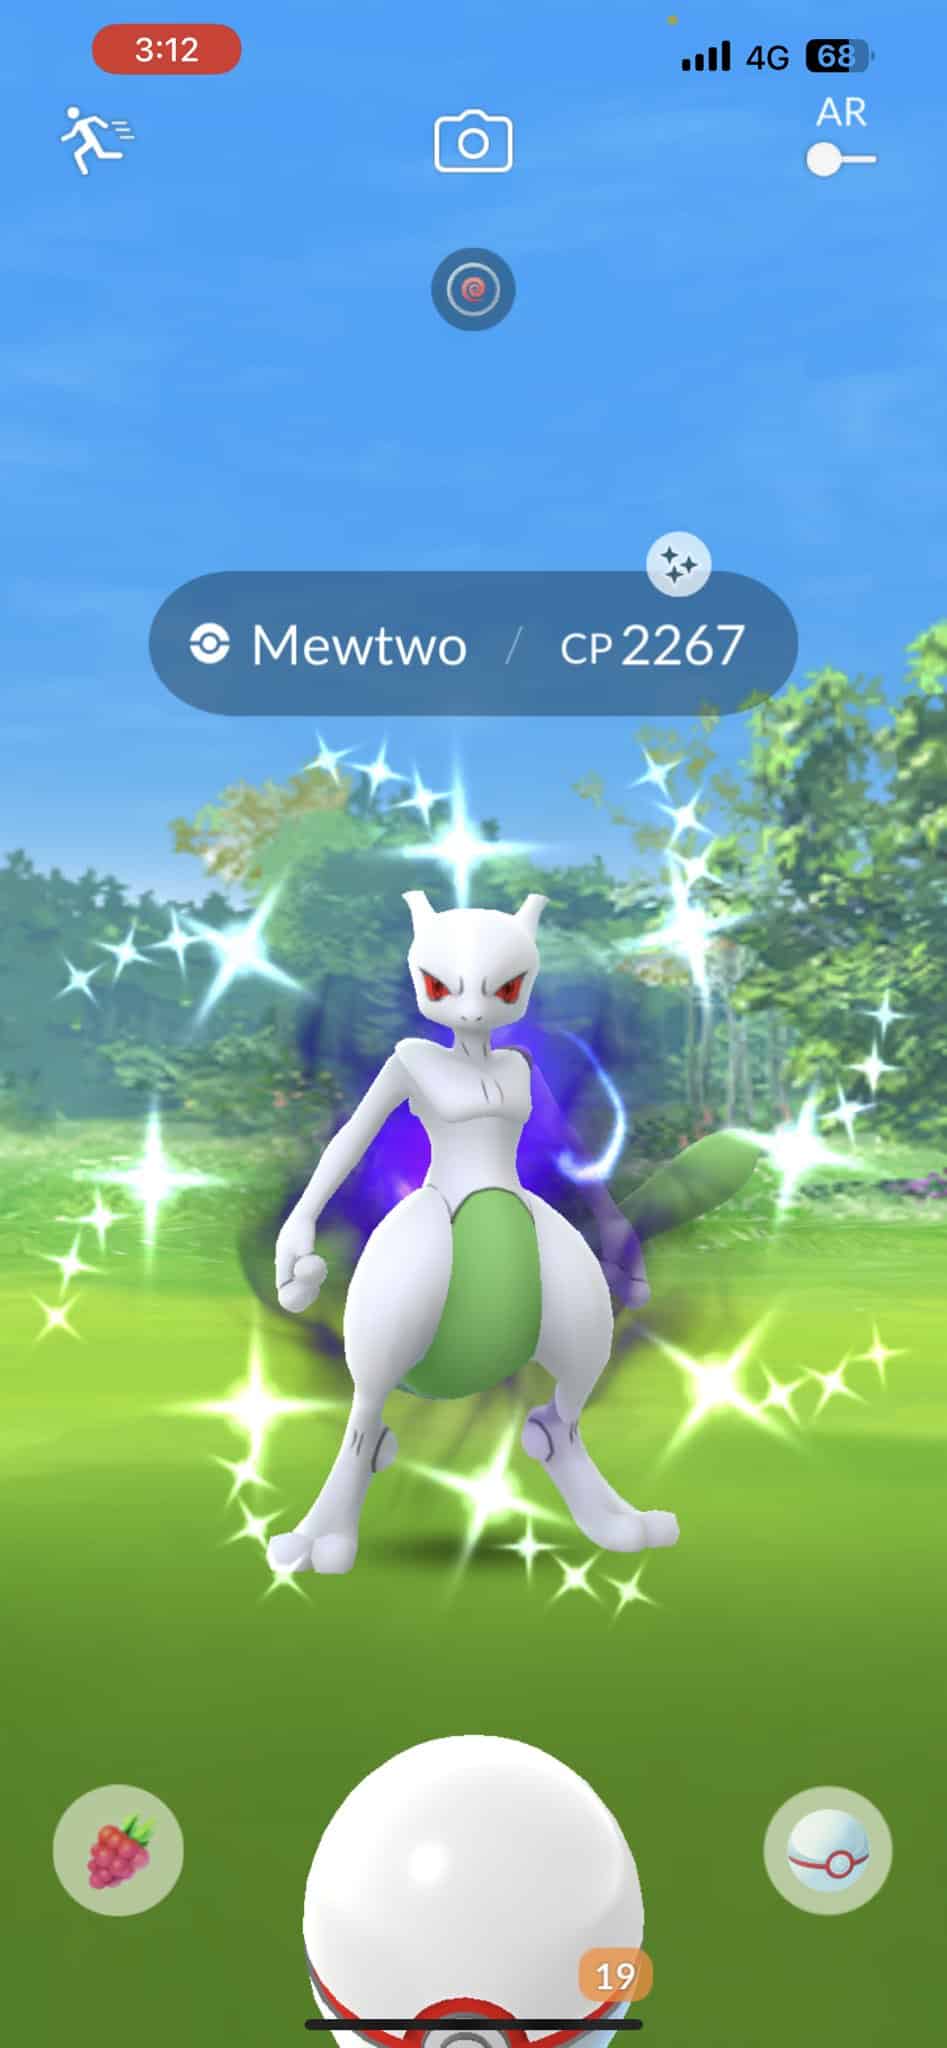 Here's my shadow mewtwo. What's the best move set to use without